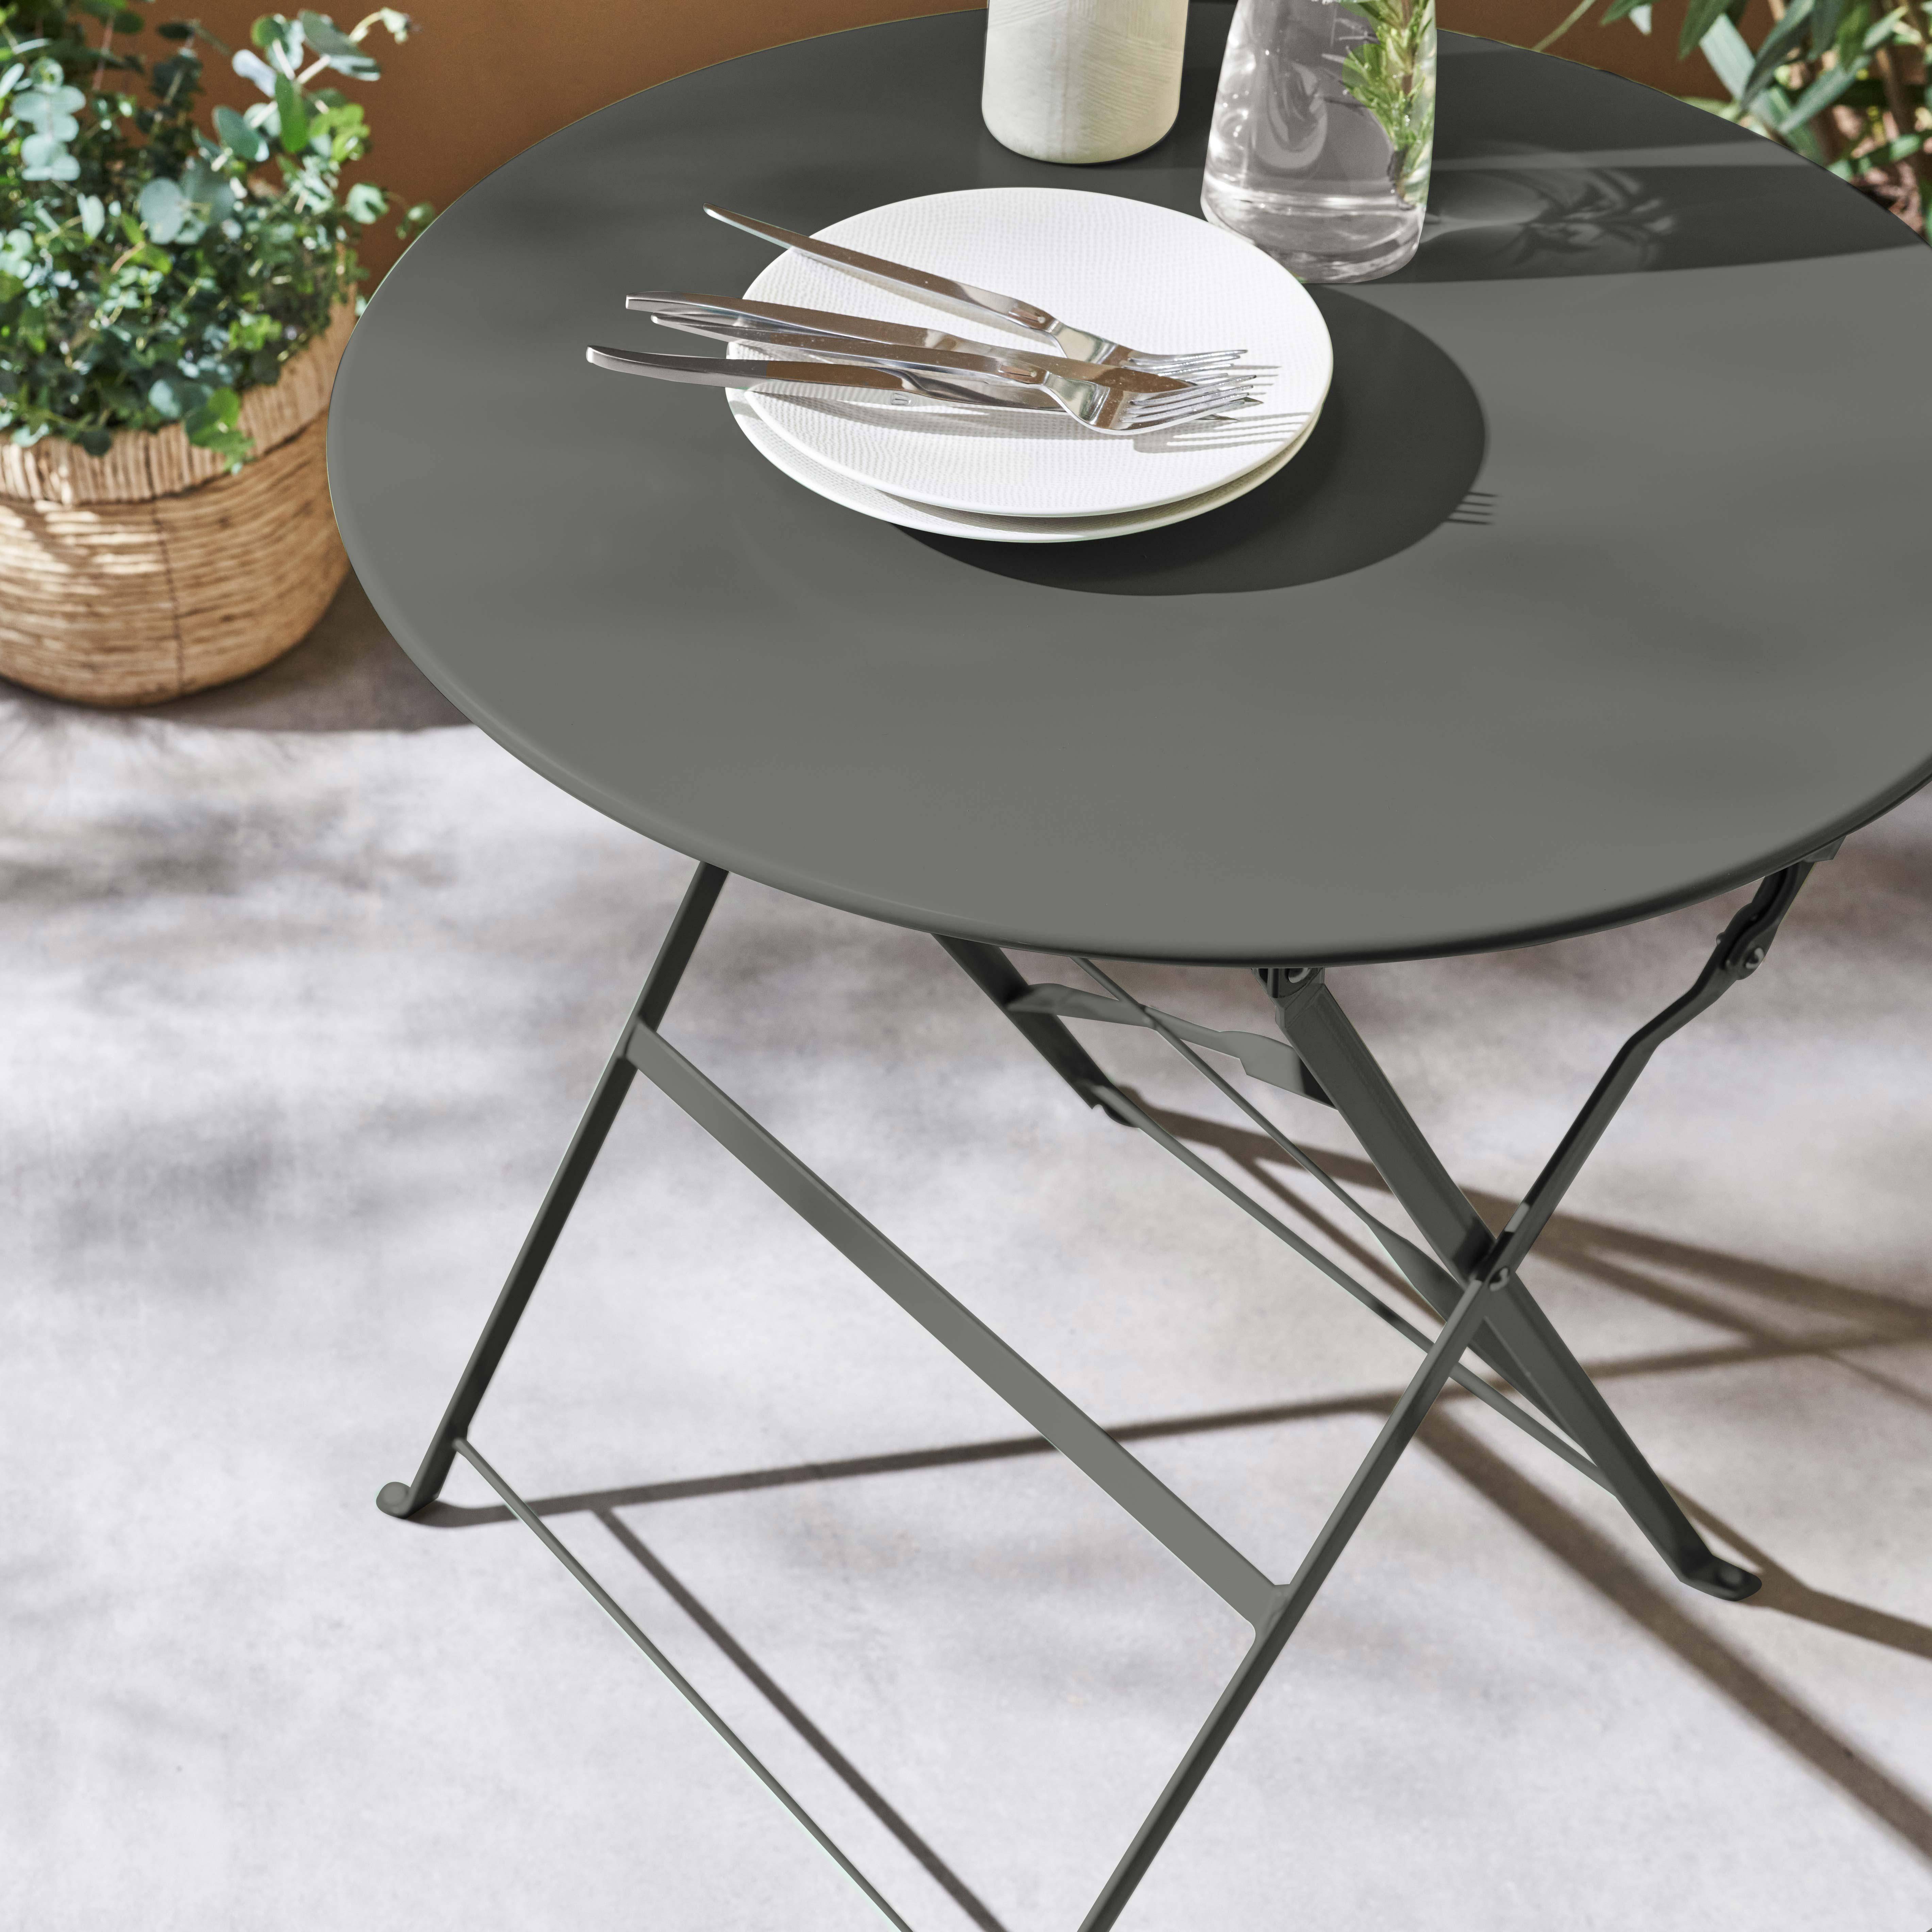 Foldable bistro garden table - Round Emilia anthracite- Round table Ø60cm, thermo-lacquered steel,sweeek,Photo2